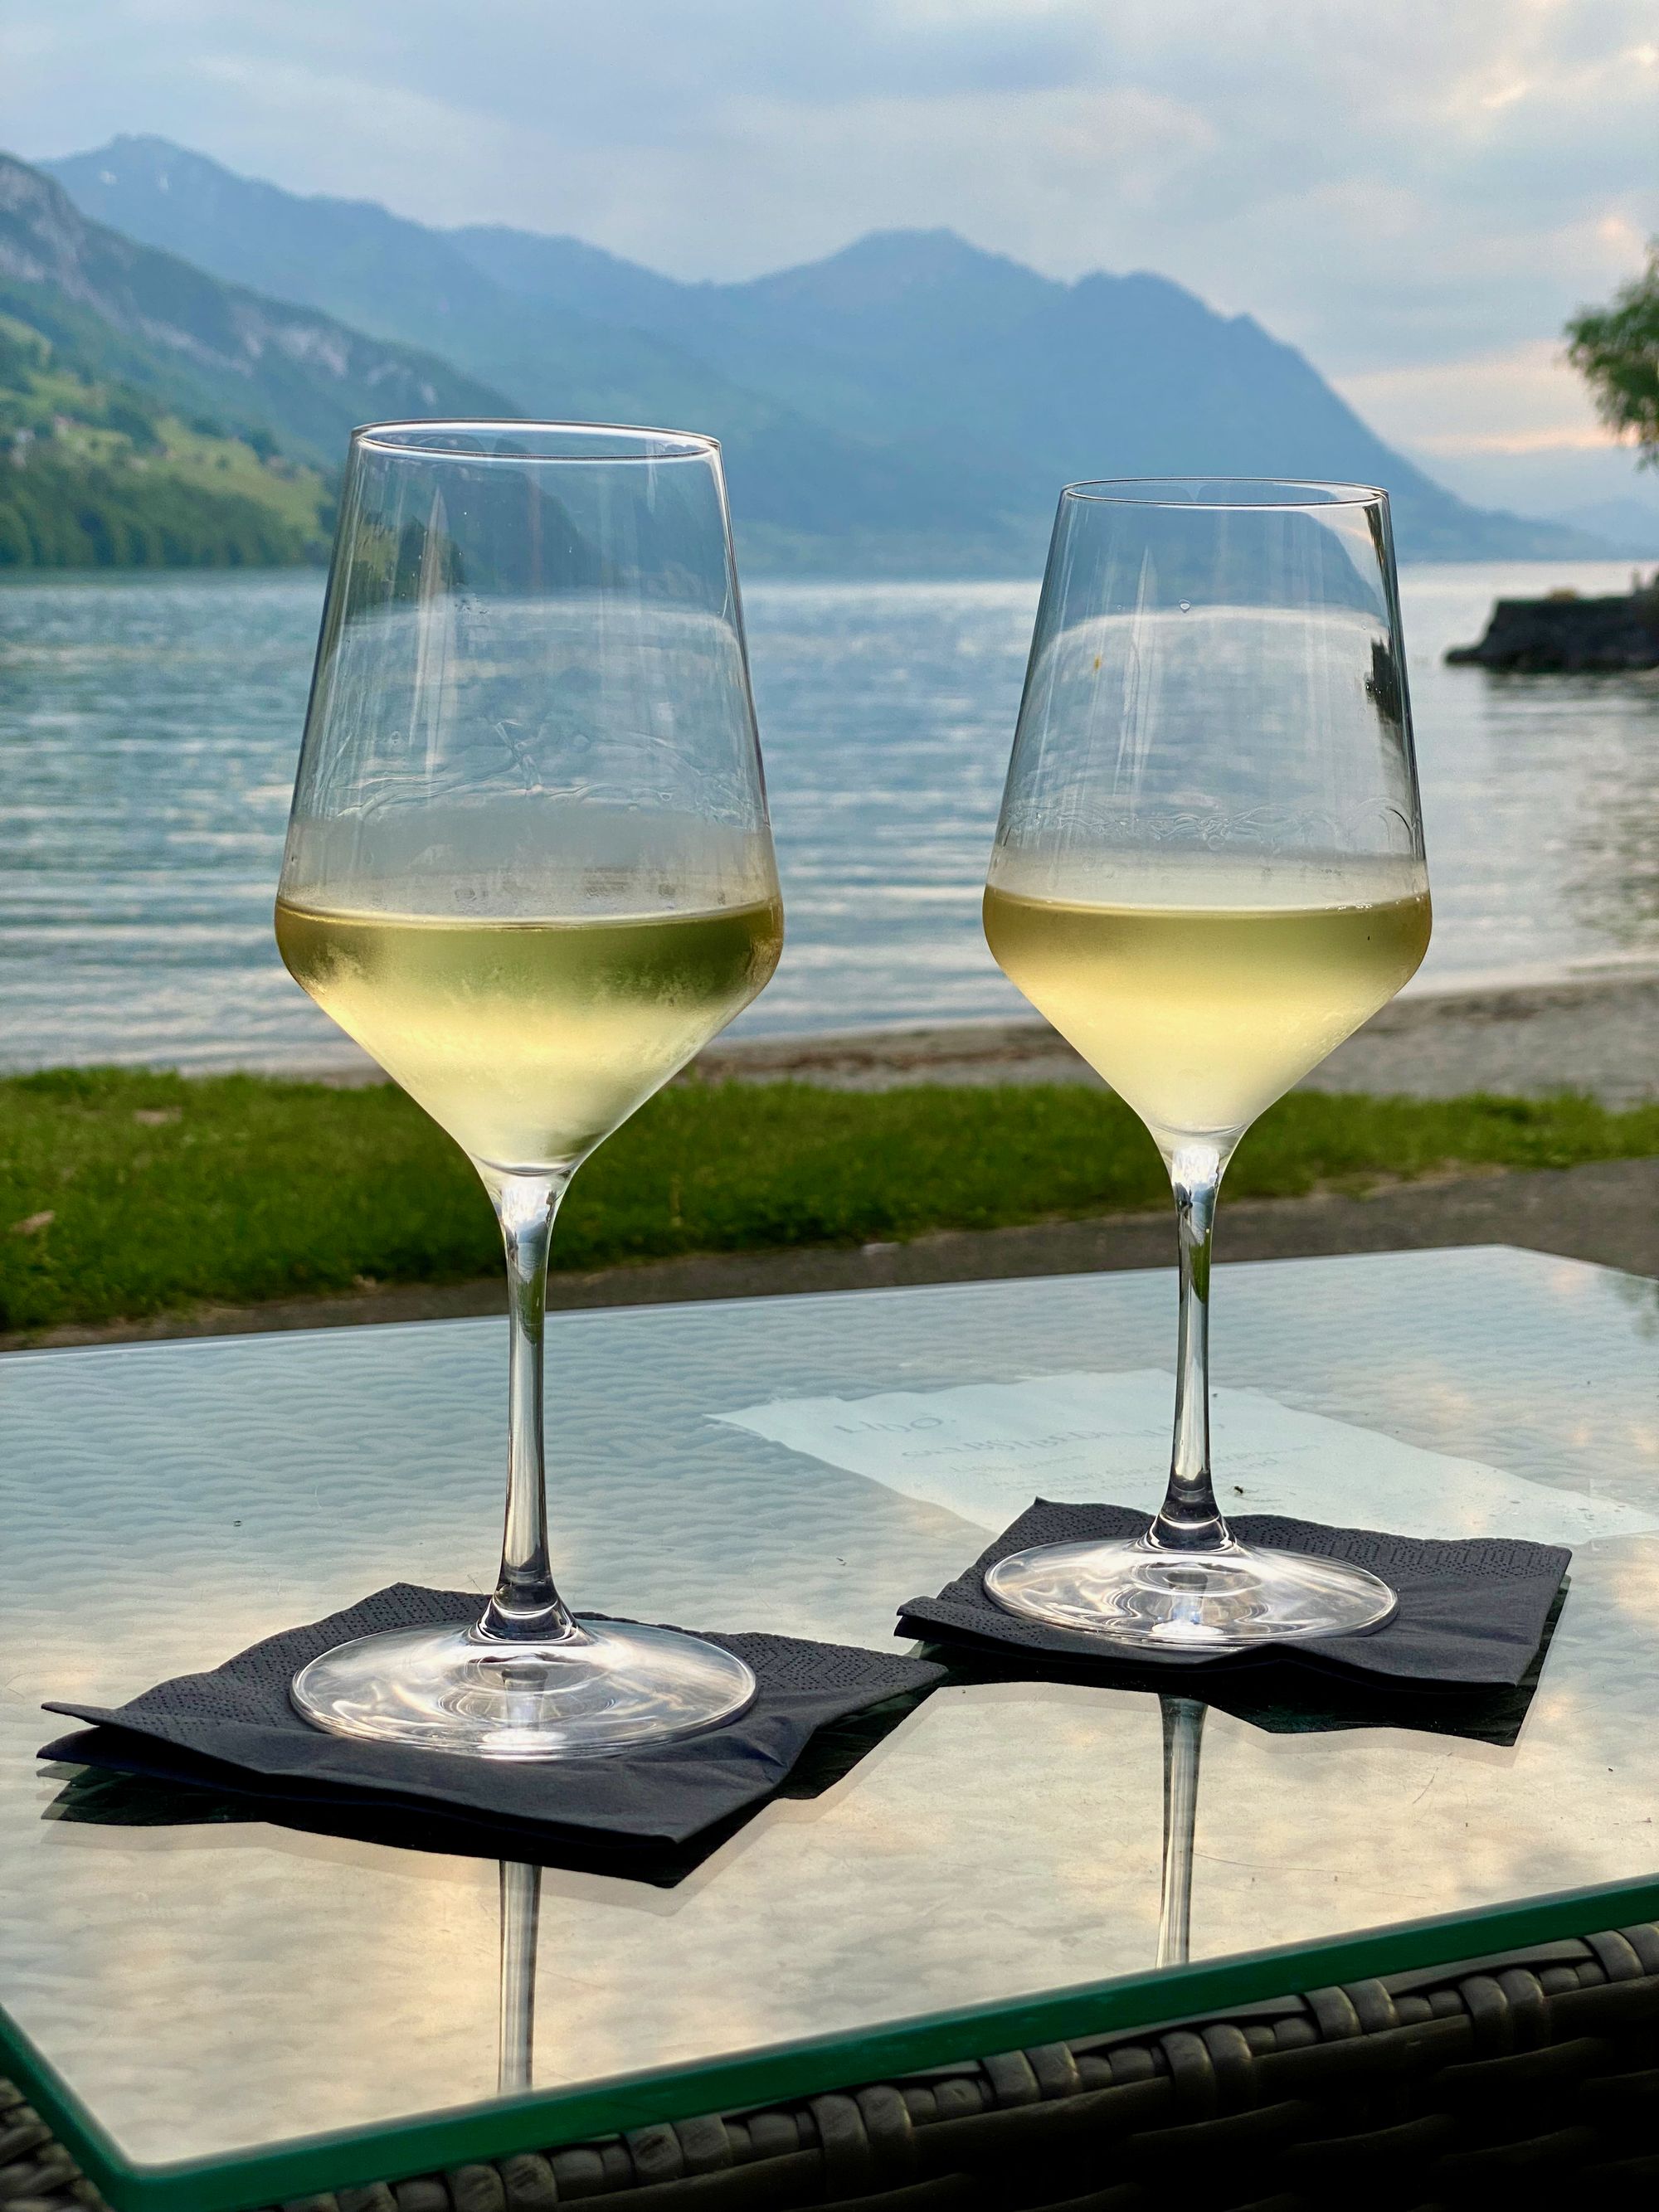 Sunset over lake Lucerne with two glasses on wine in front